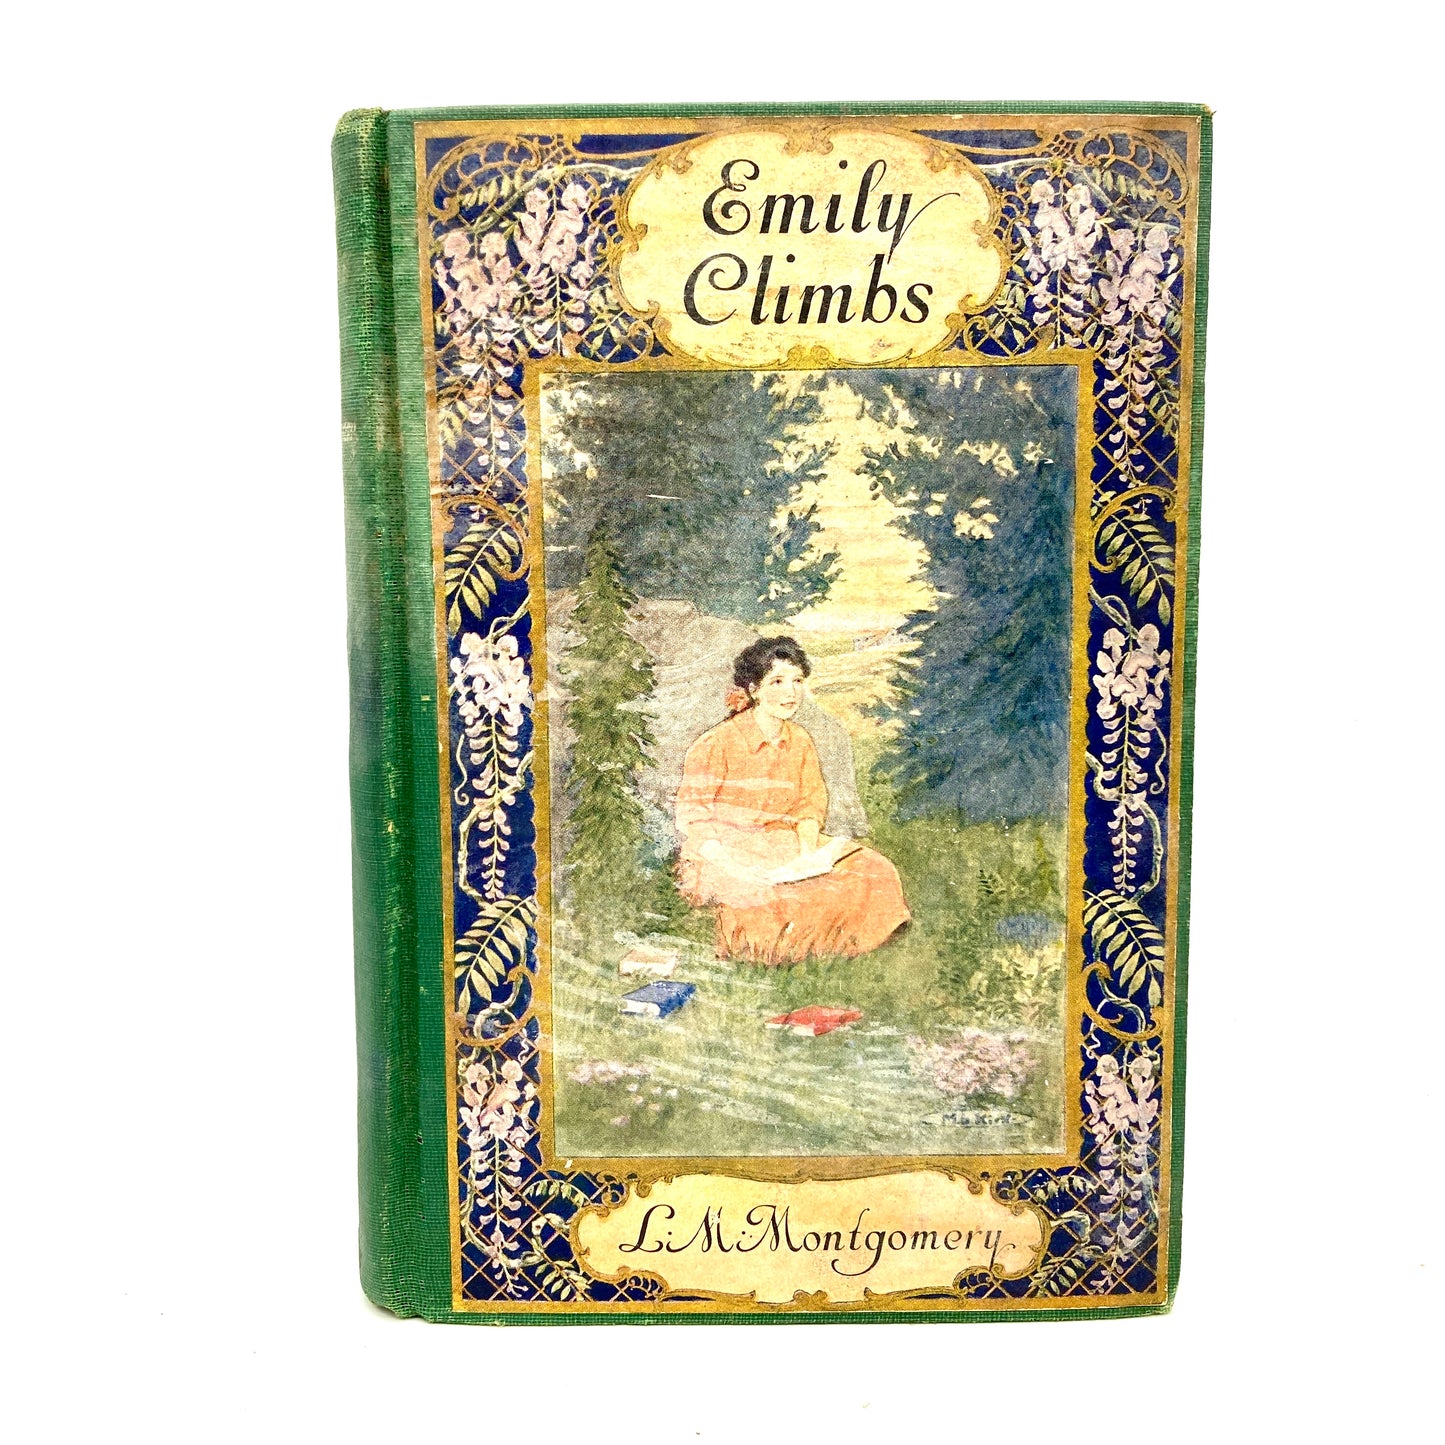 MONTGOMERY, L.M. "Emily Climbs" [Frederick A. Stokes, 1925] 1st Edition - Buzz Bookstore